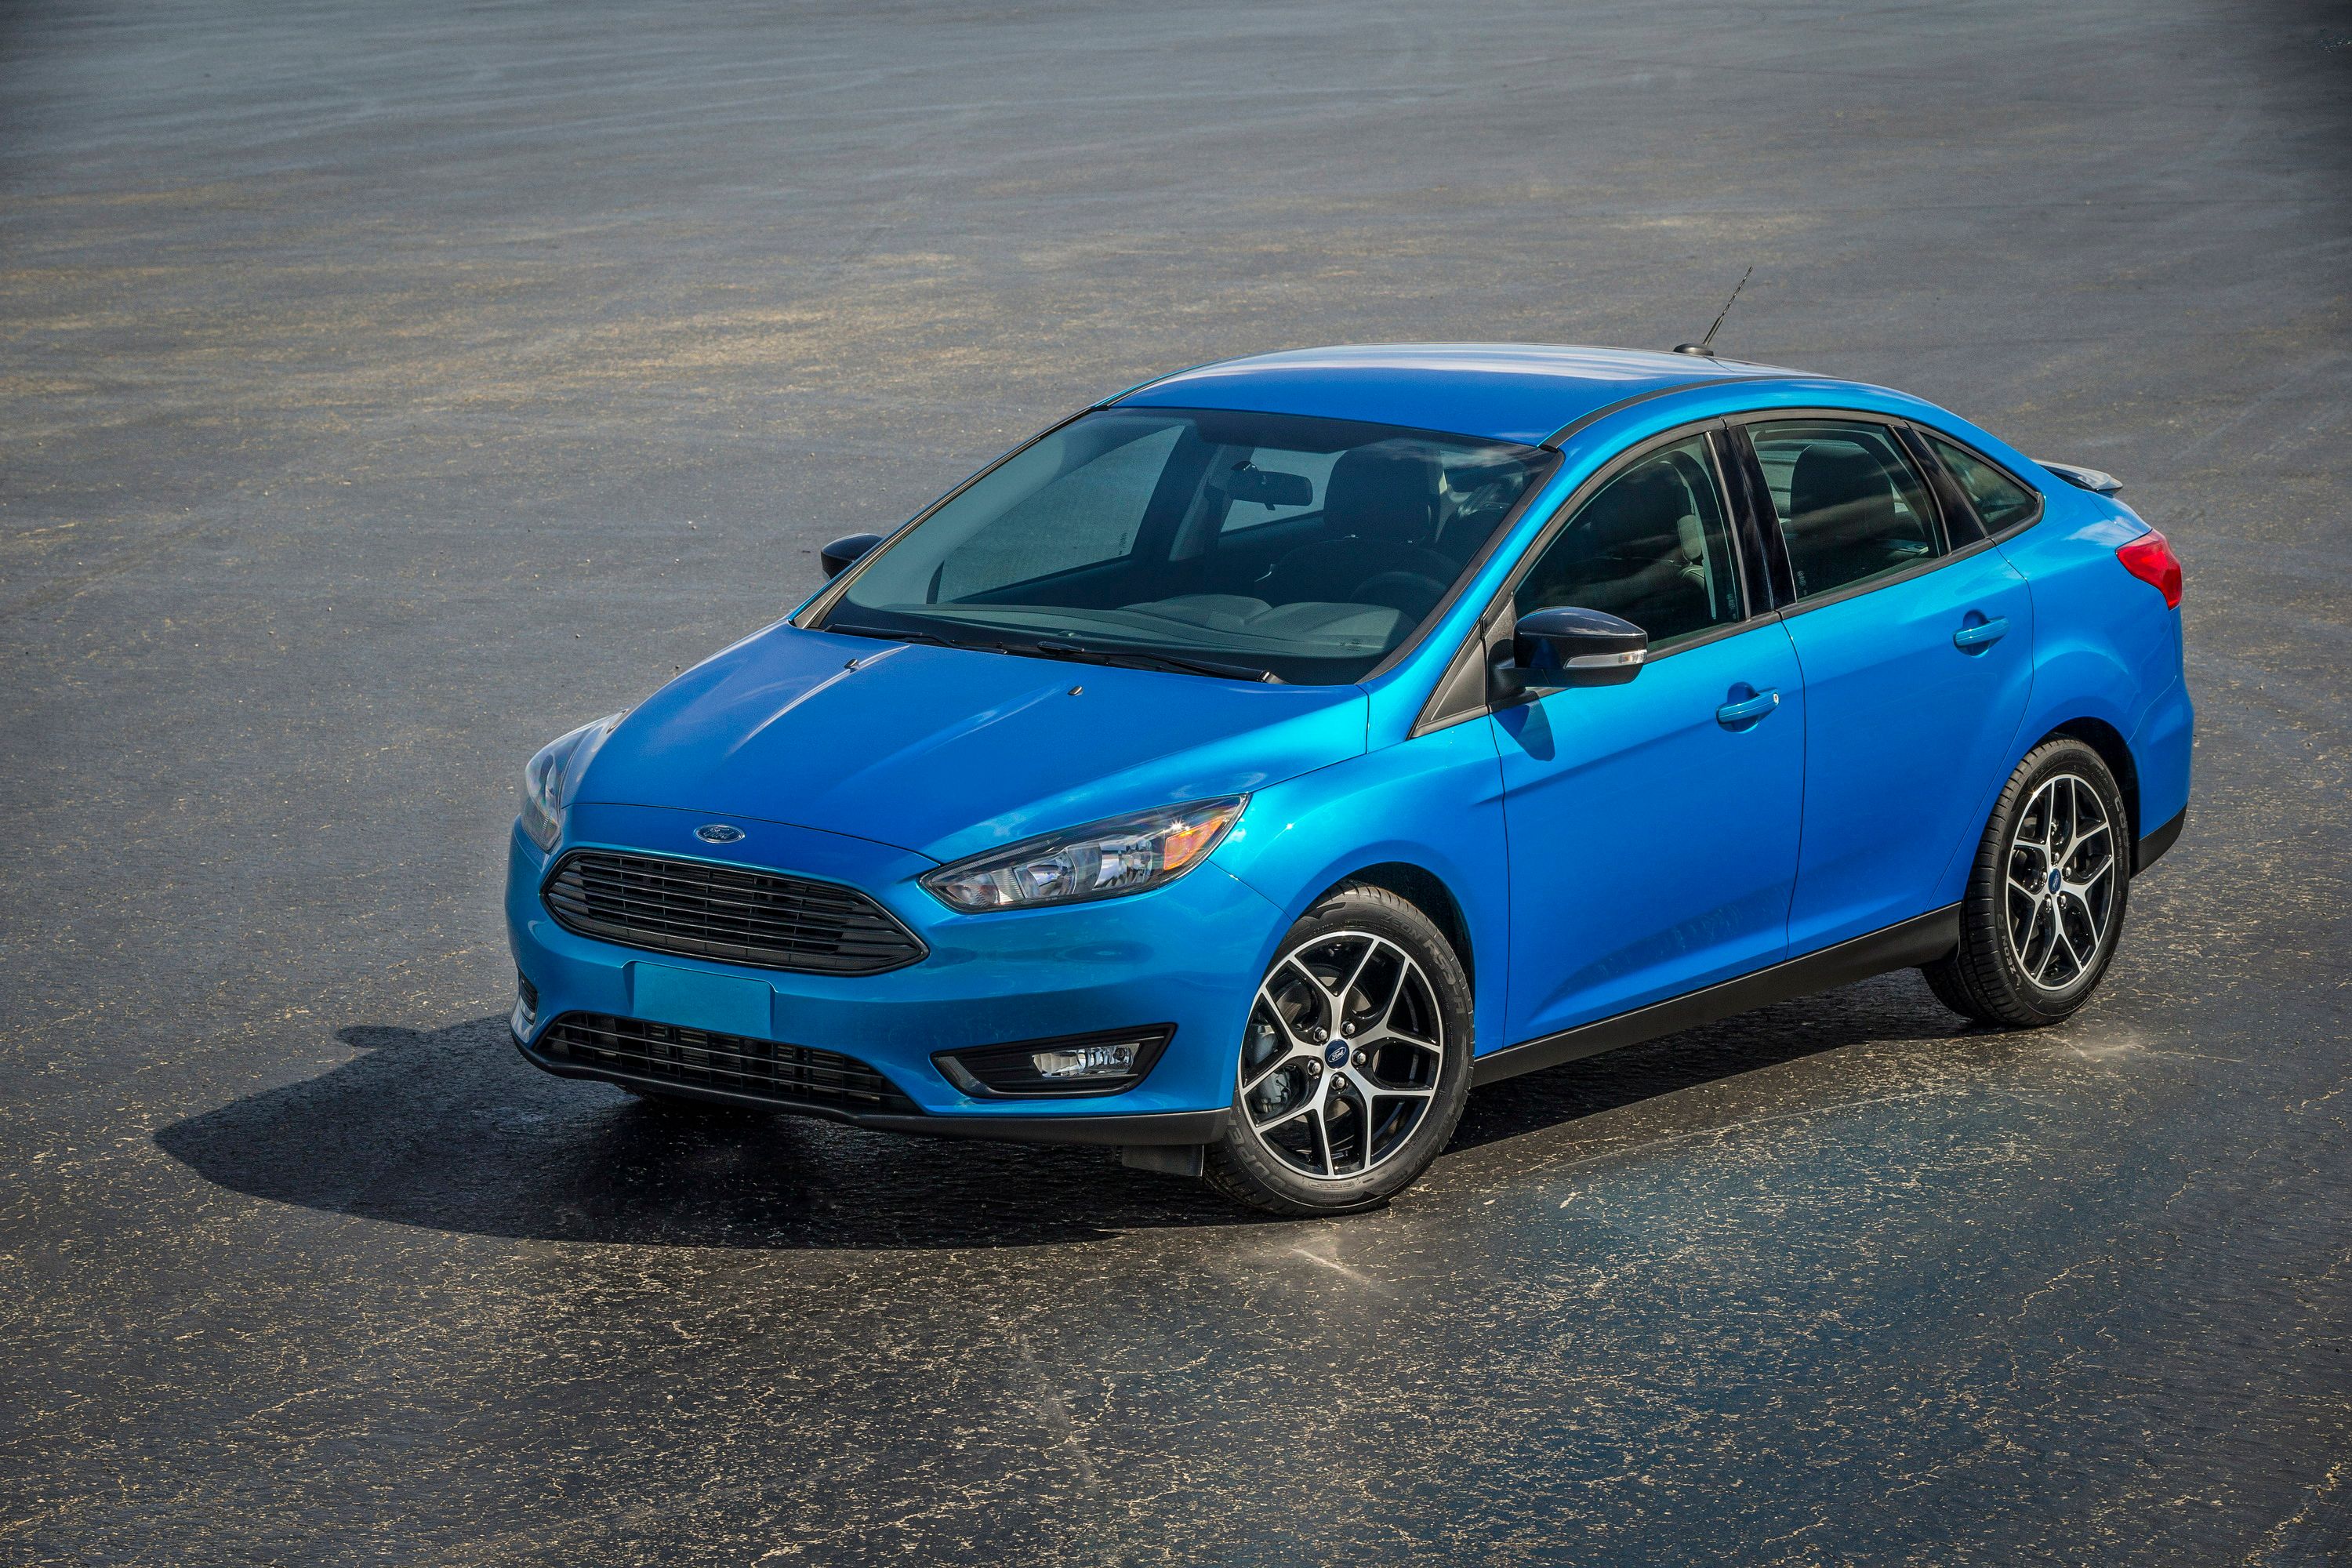 2015 Ford Focus Sedan parked sidways.